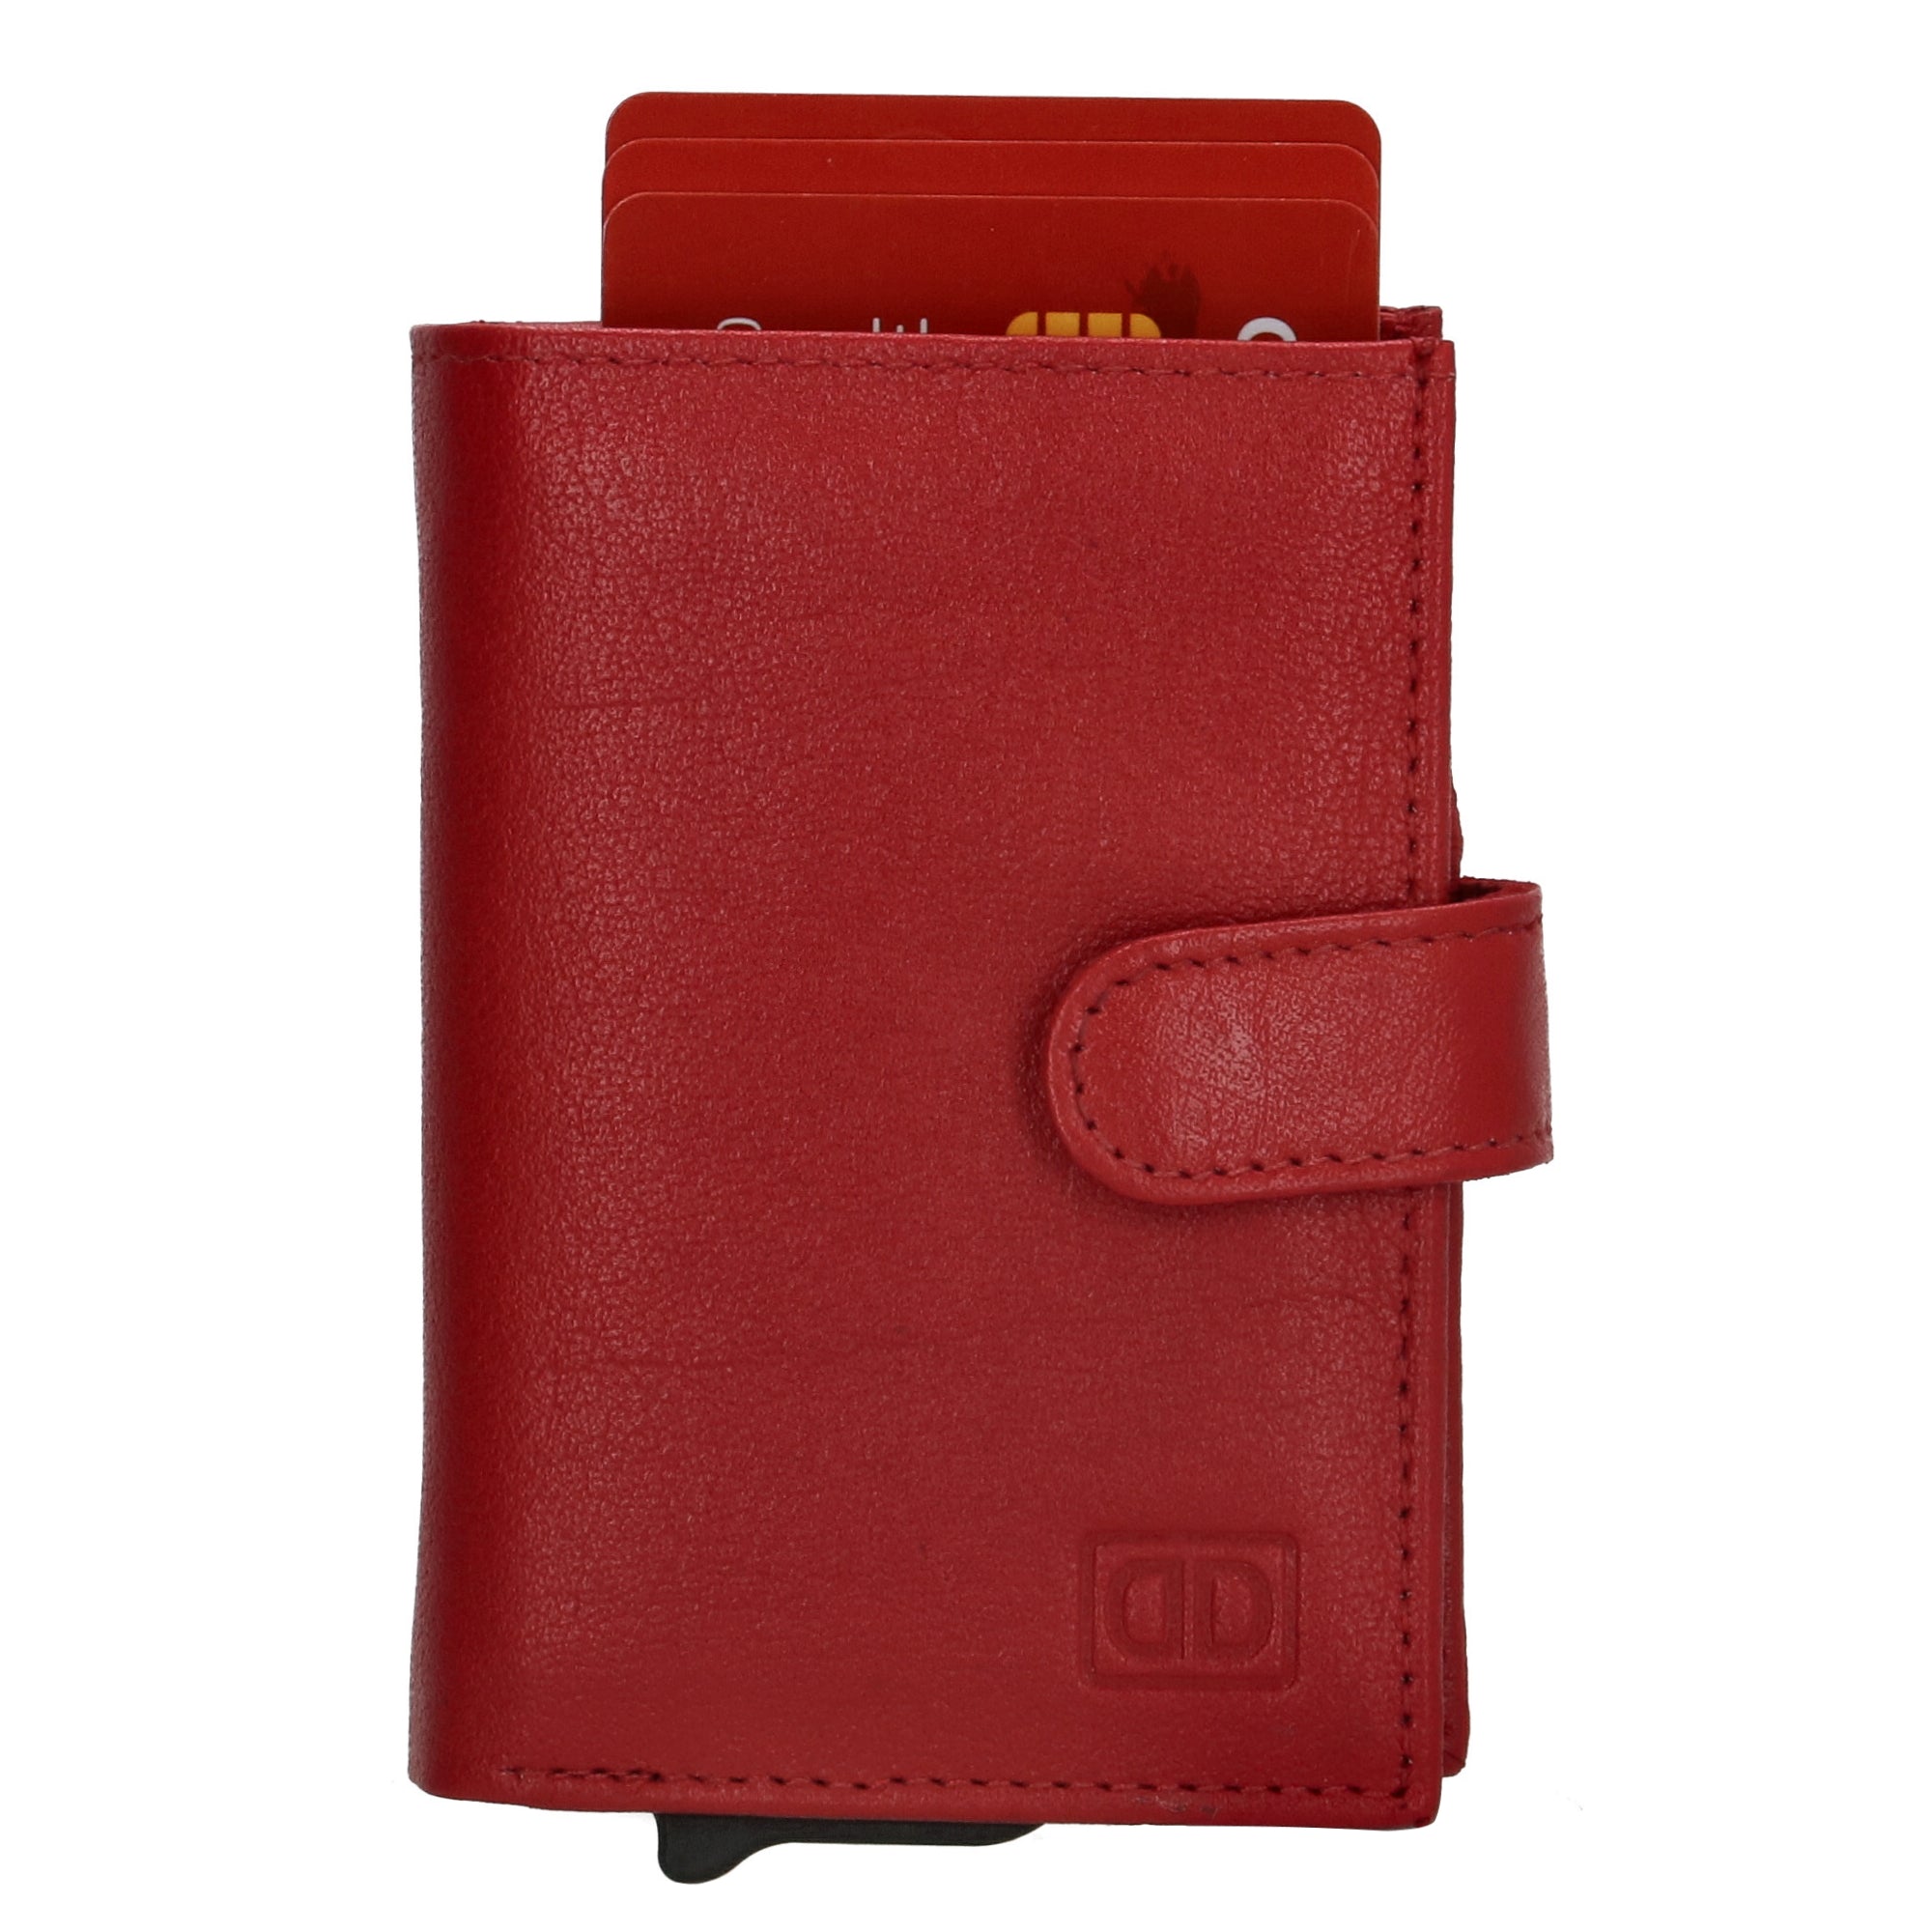 Double-d fh-serie safety wallet Rood